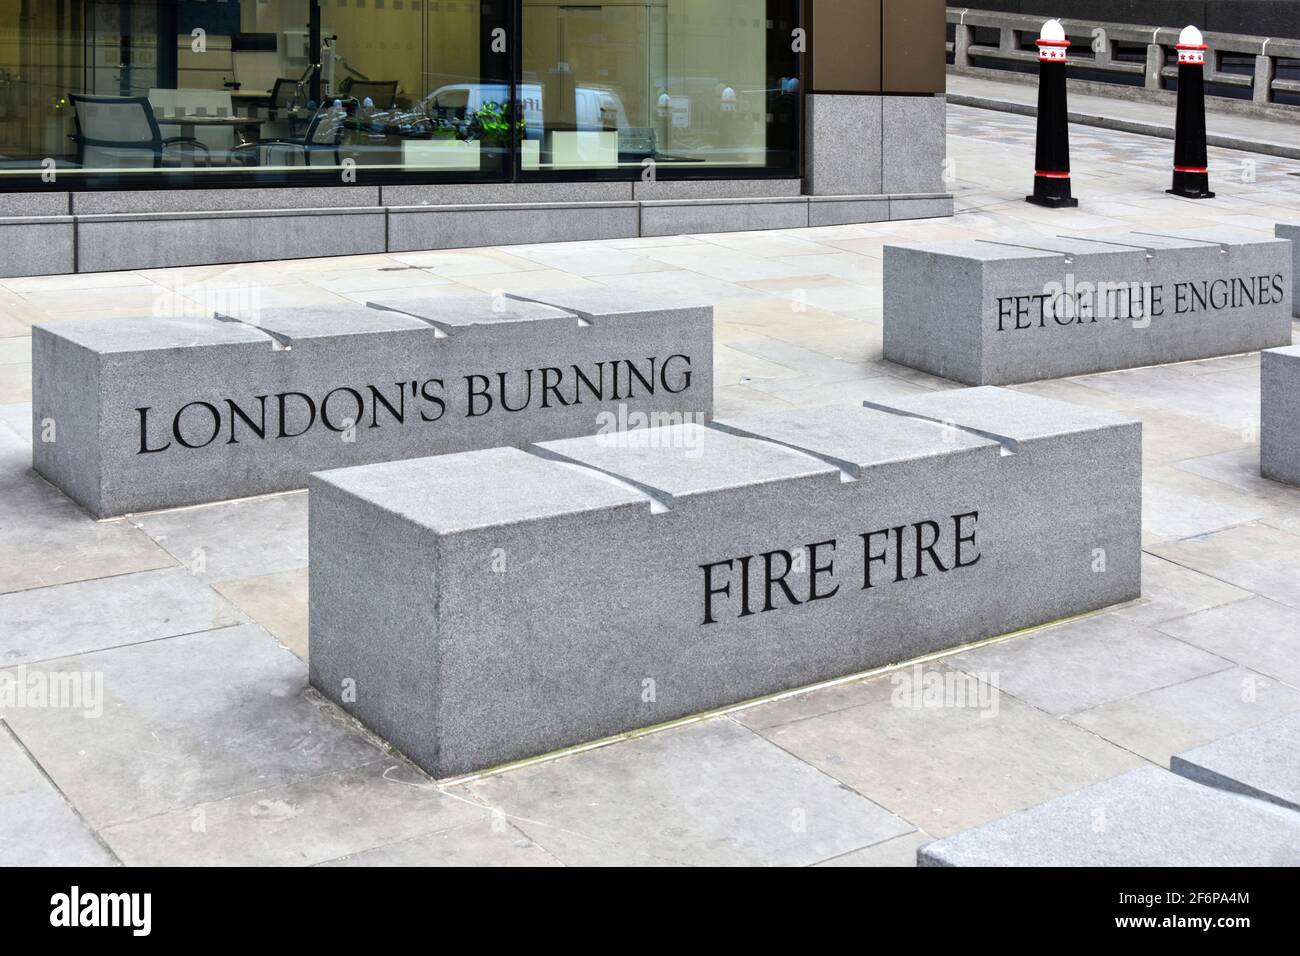 Large granite stone bench seat & engraved quotations from popular childs poem about Great Fire of London located beside Monument column in London UK Stock Photo